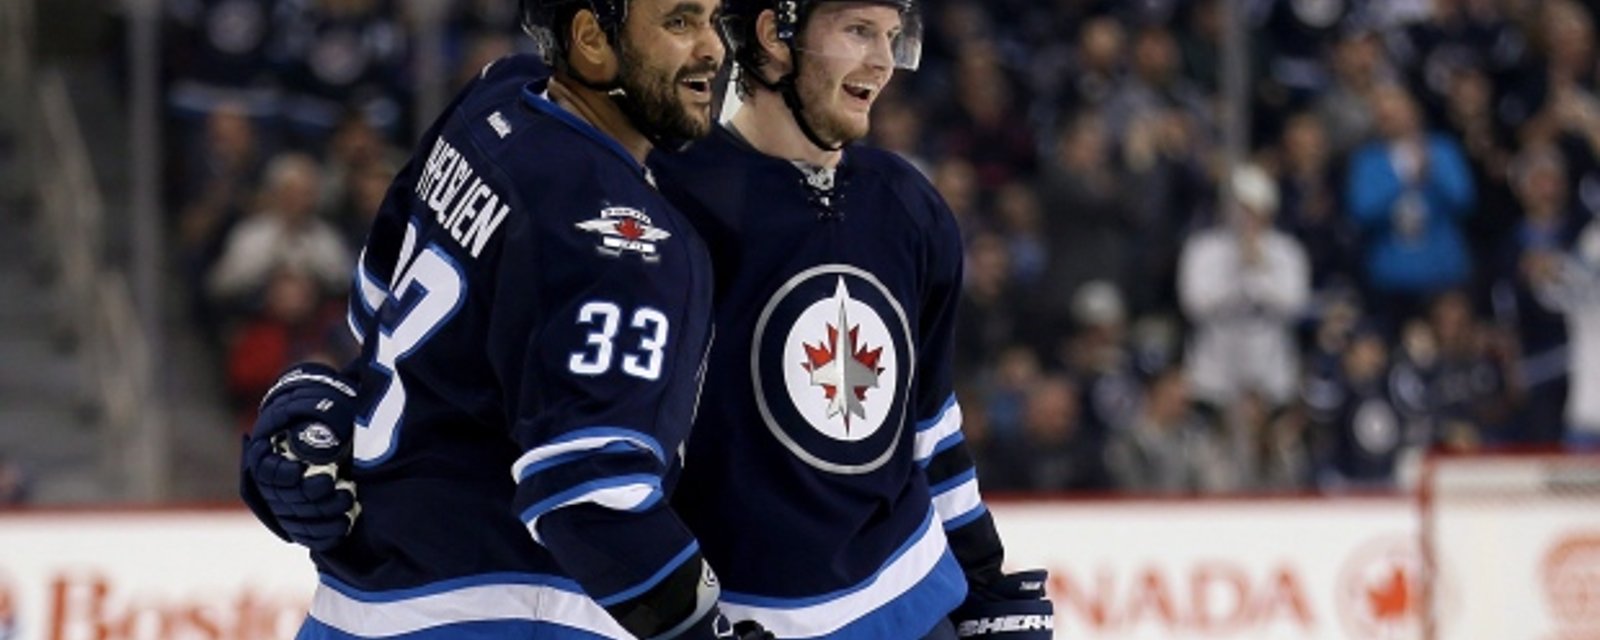 Rumor: One player may have just played his final game as a Winnipeg Jet.